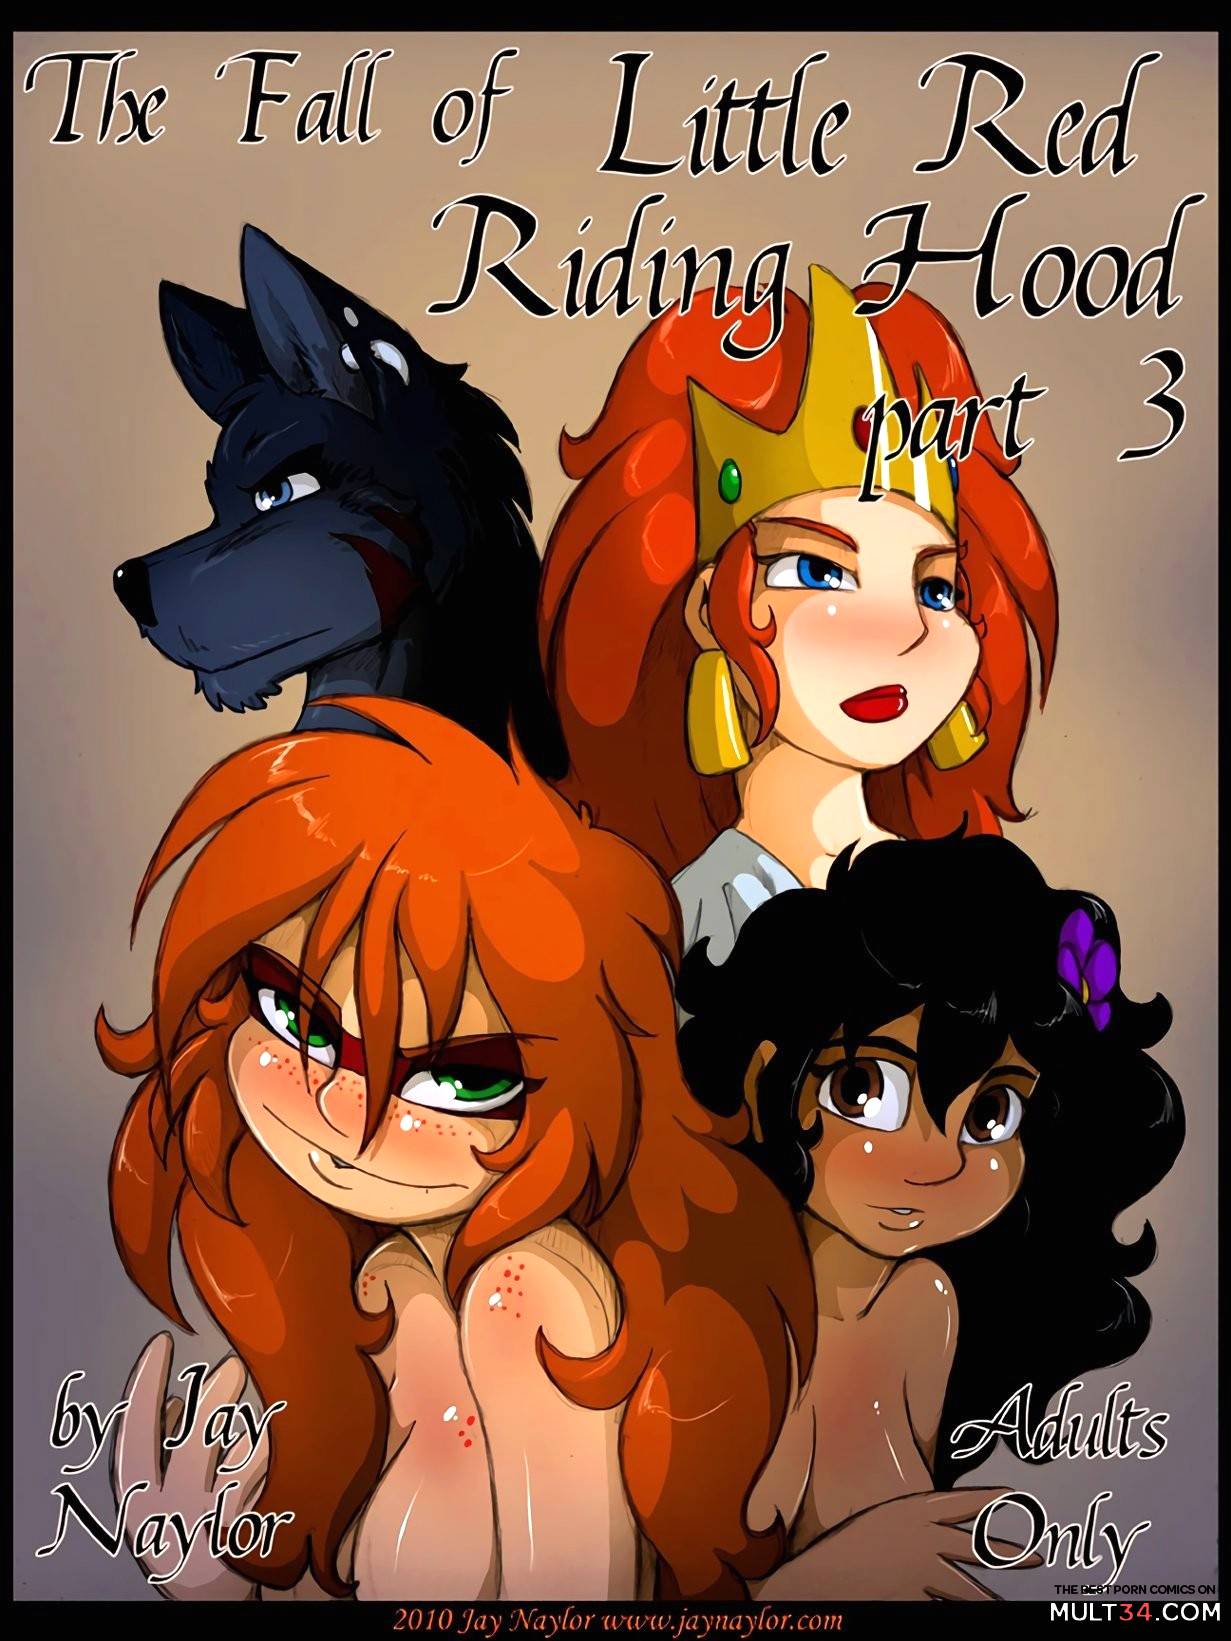 1231px x 1641px - The Fall of Little Red Riding Hood pt 3 porn comic - the best cartoon porn  comics, Rule 34 | MULT34